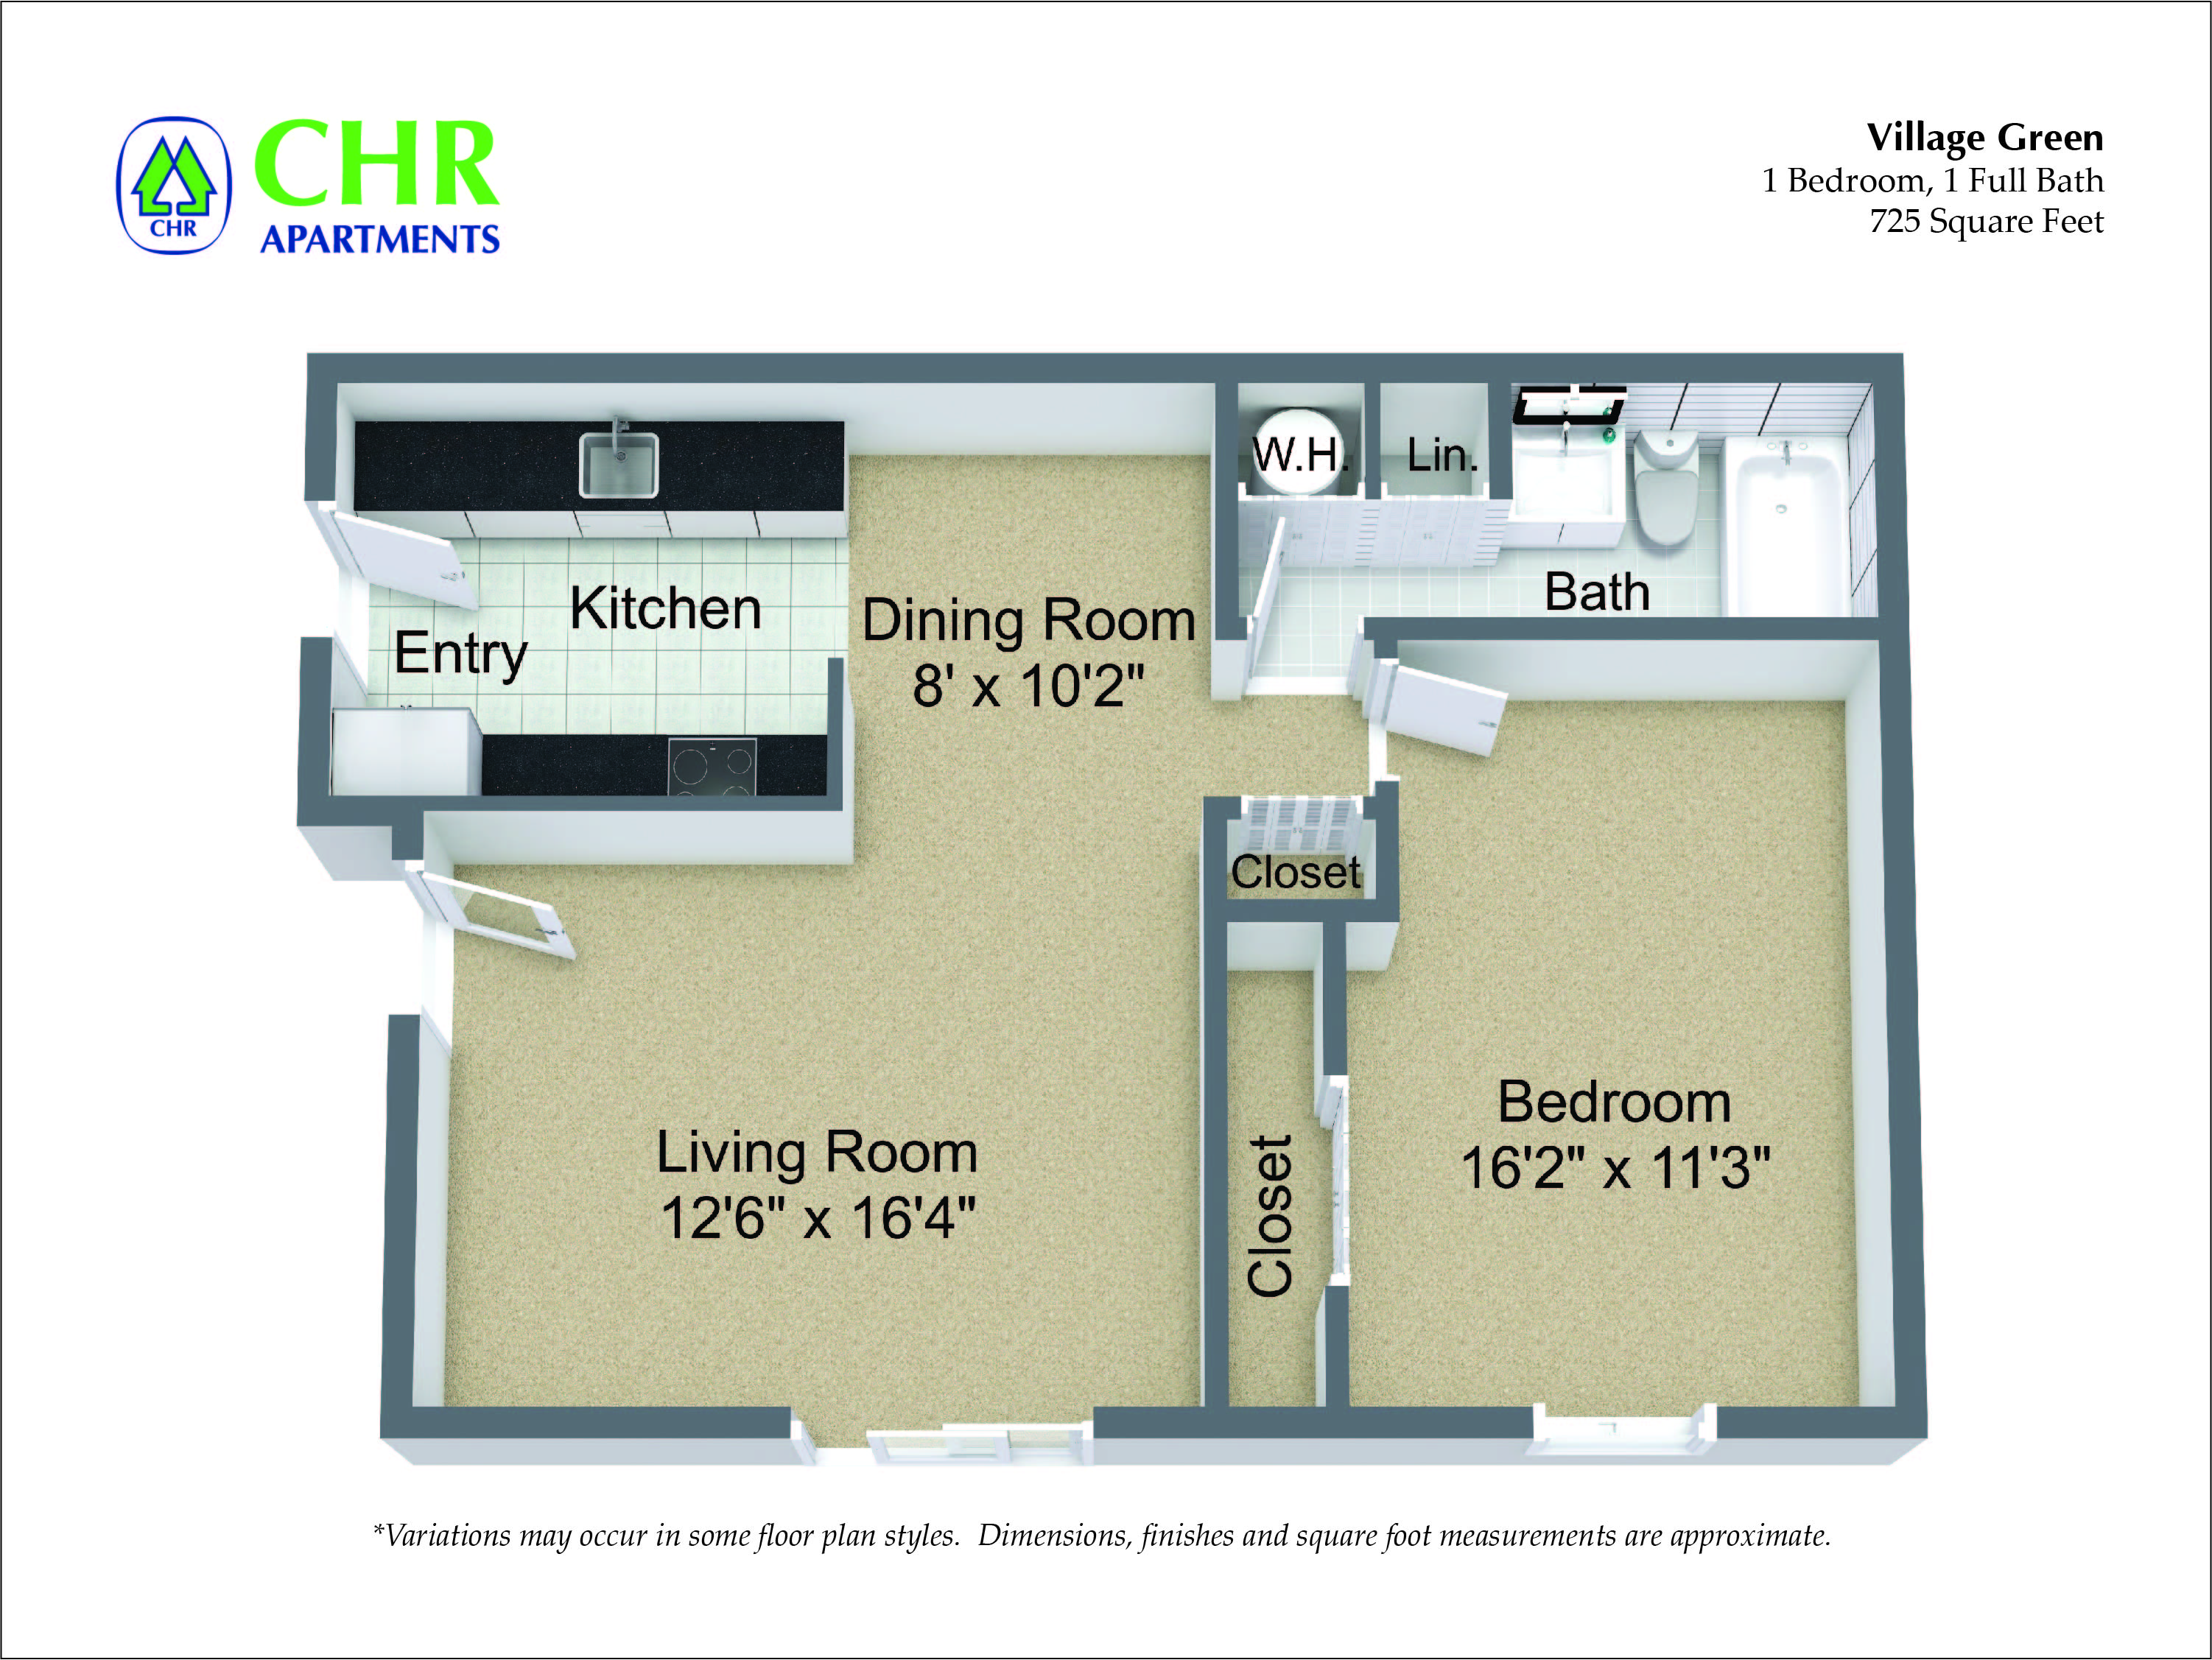 Click to view 1 Bed/1 Bath with Large Living Room floor plan gallery